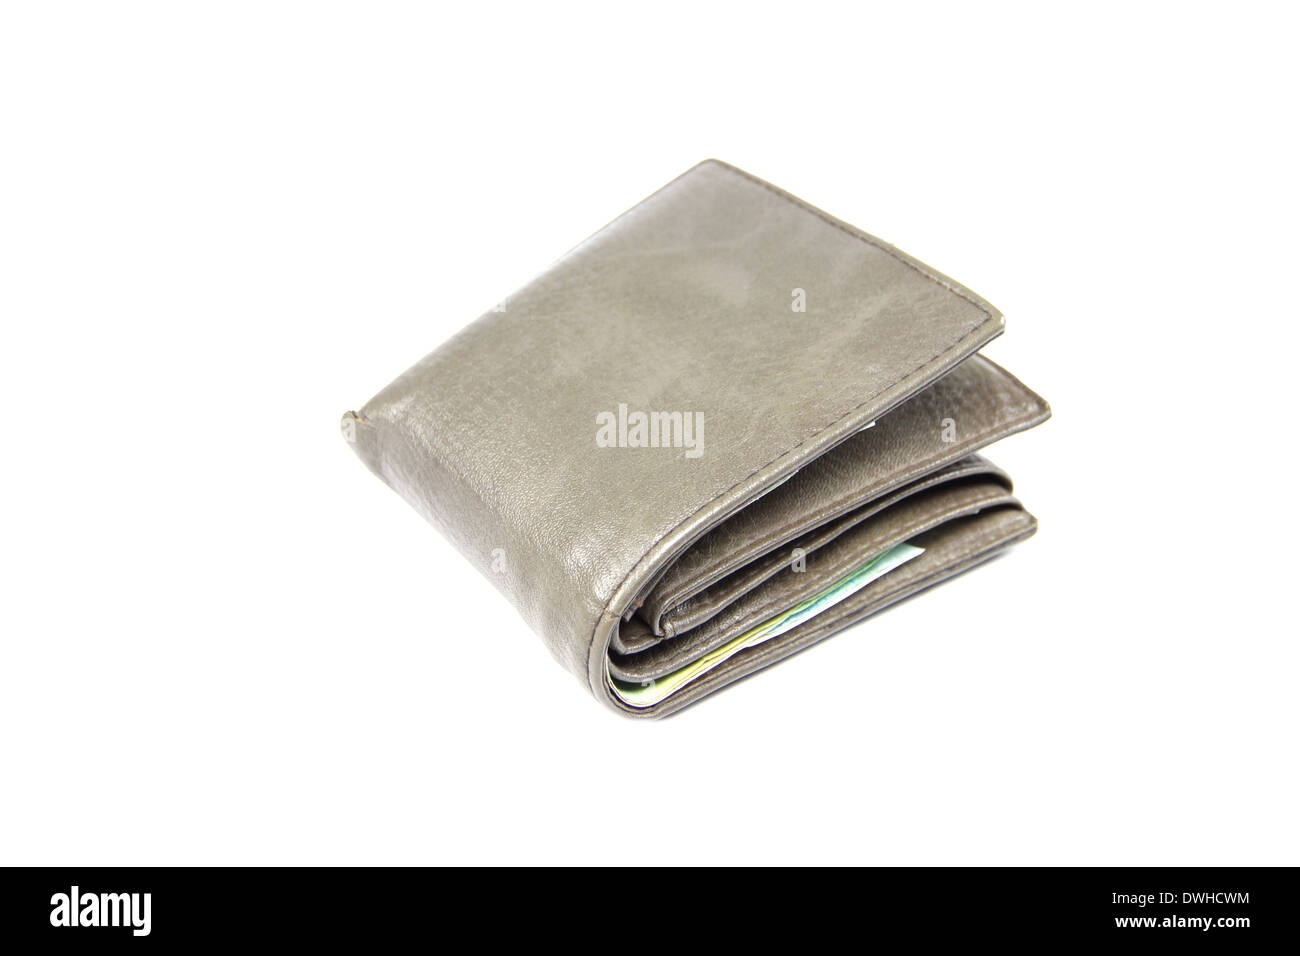 Wallet designed of leather on white background. Stock Photo